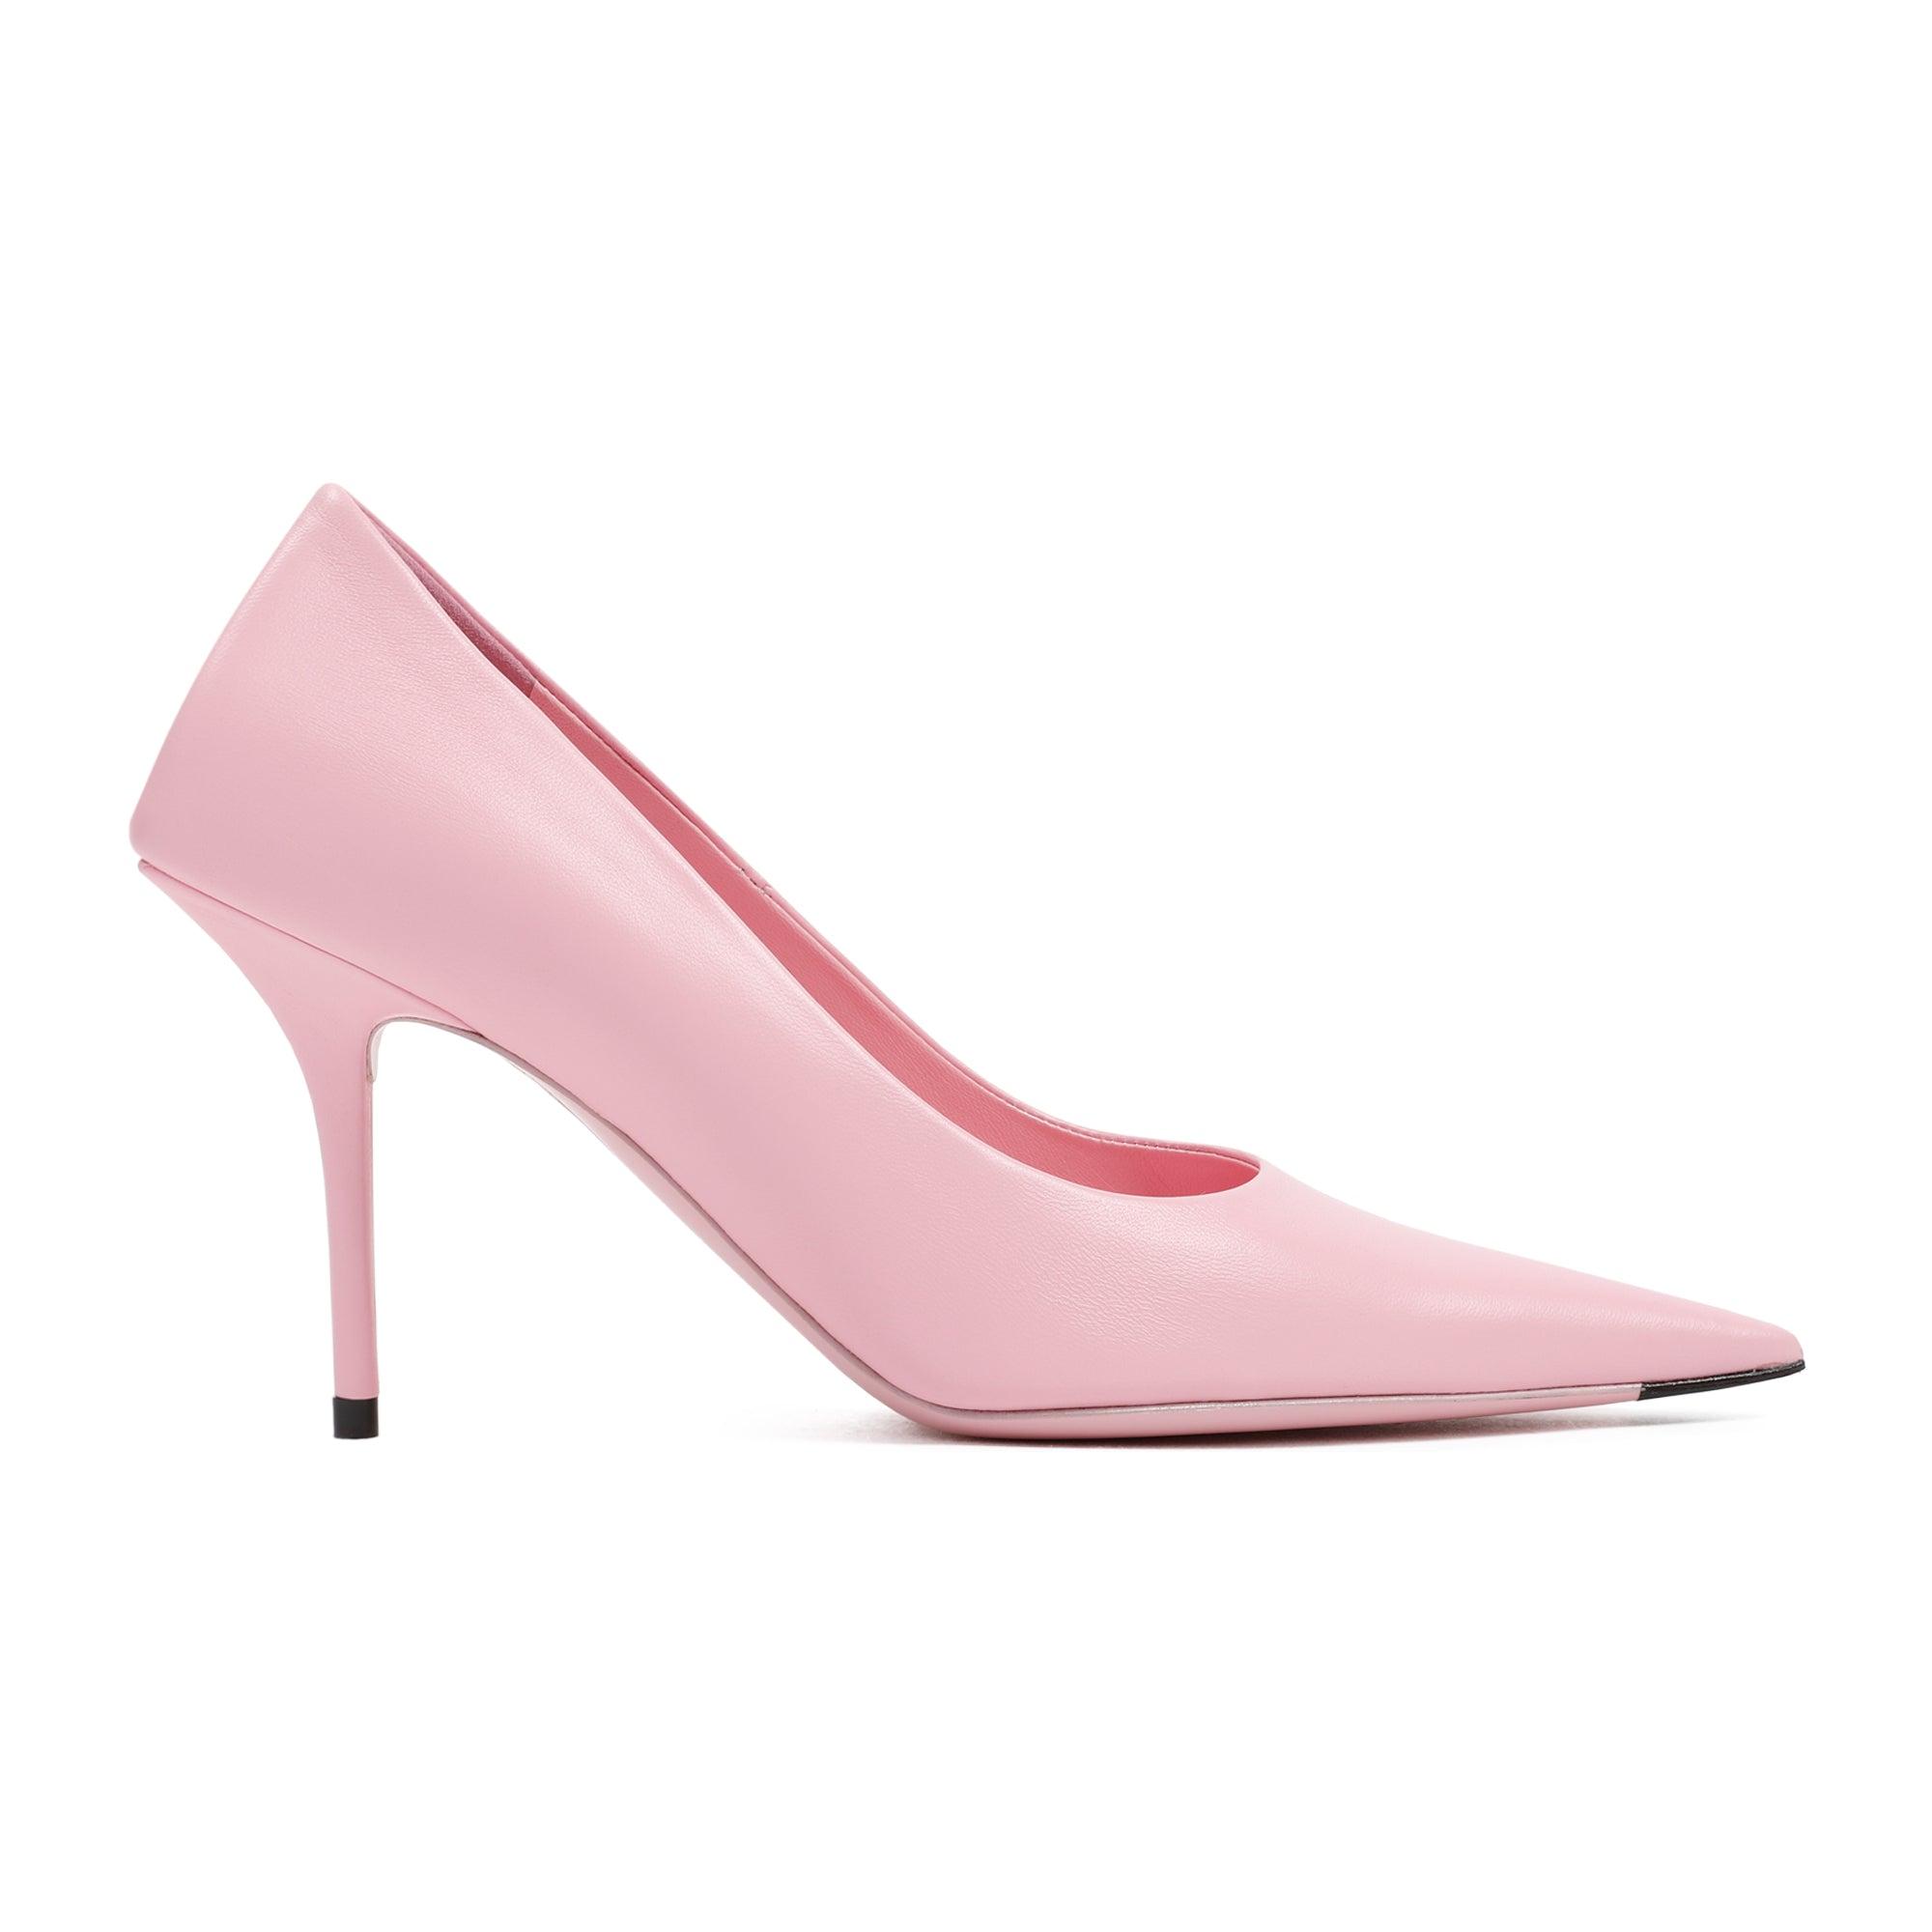 Balenciaga Leather Square Knife Pumps Shoes in Pink & Purple (Pink) | Lyst